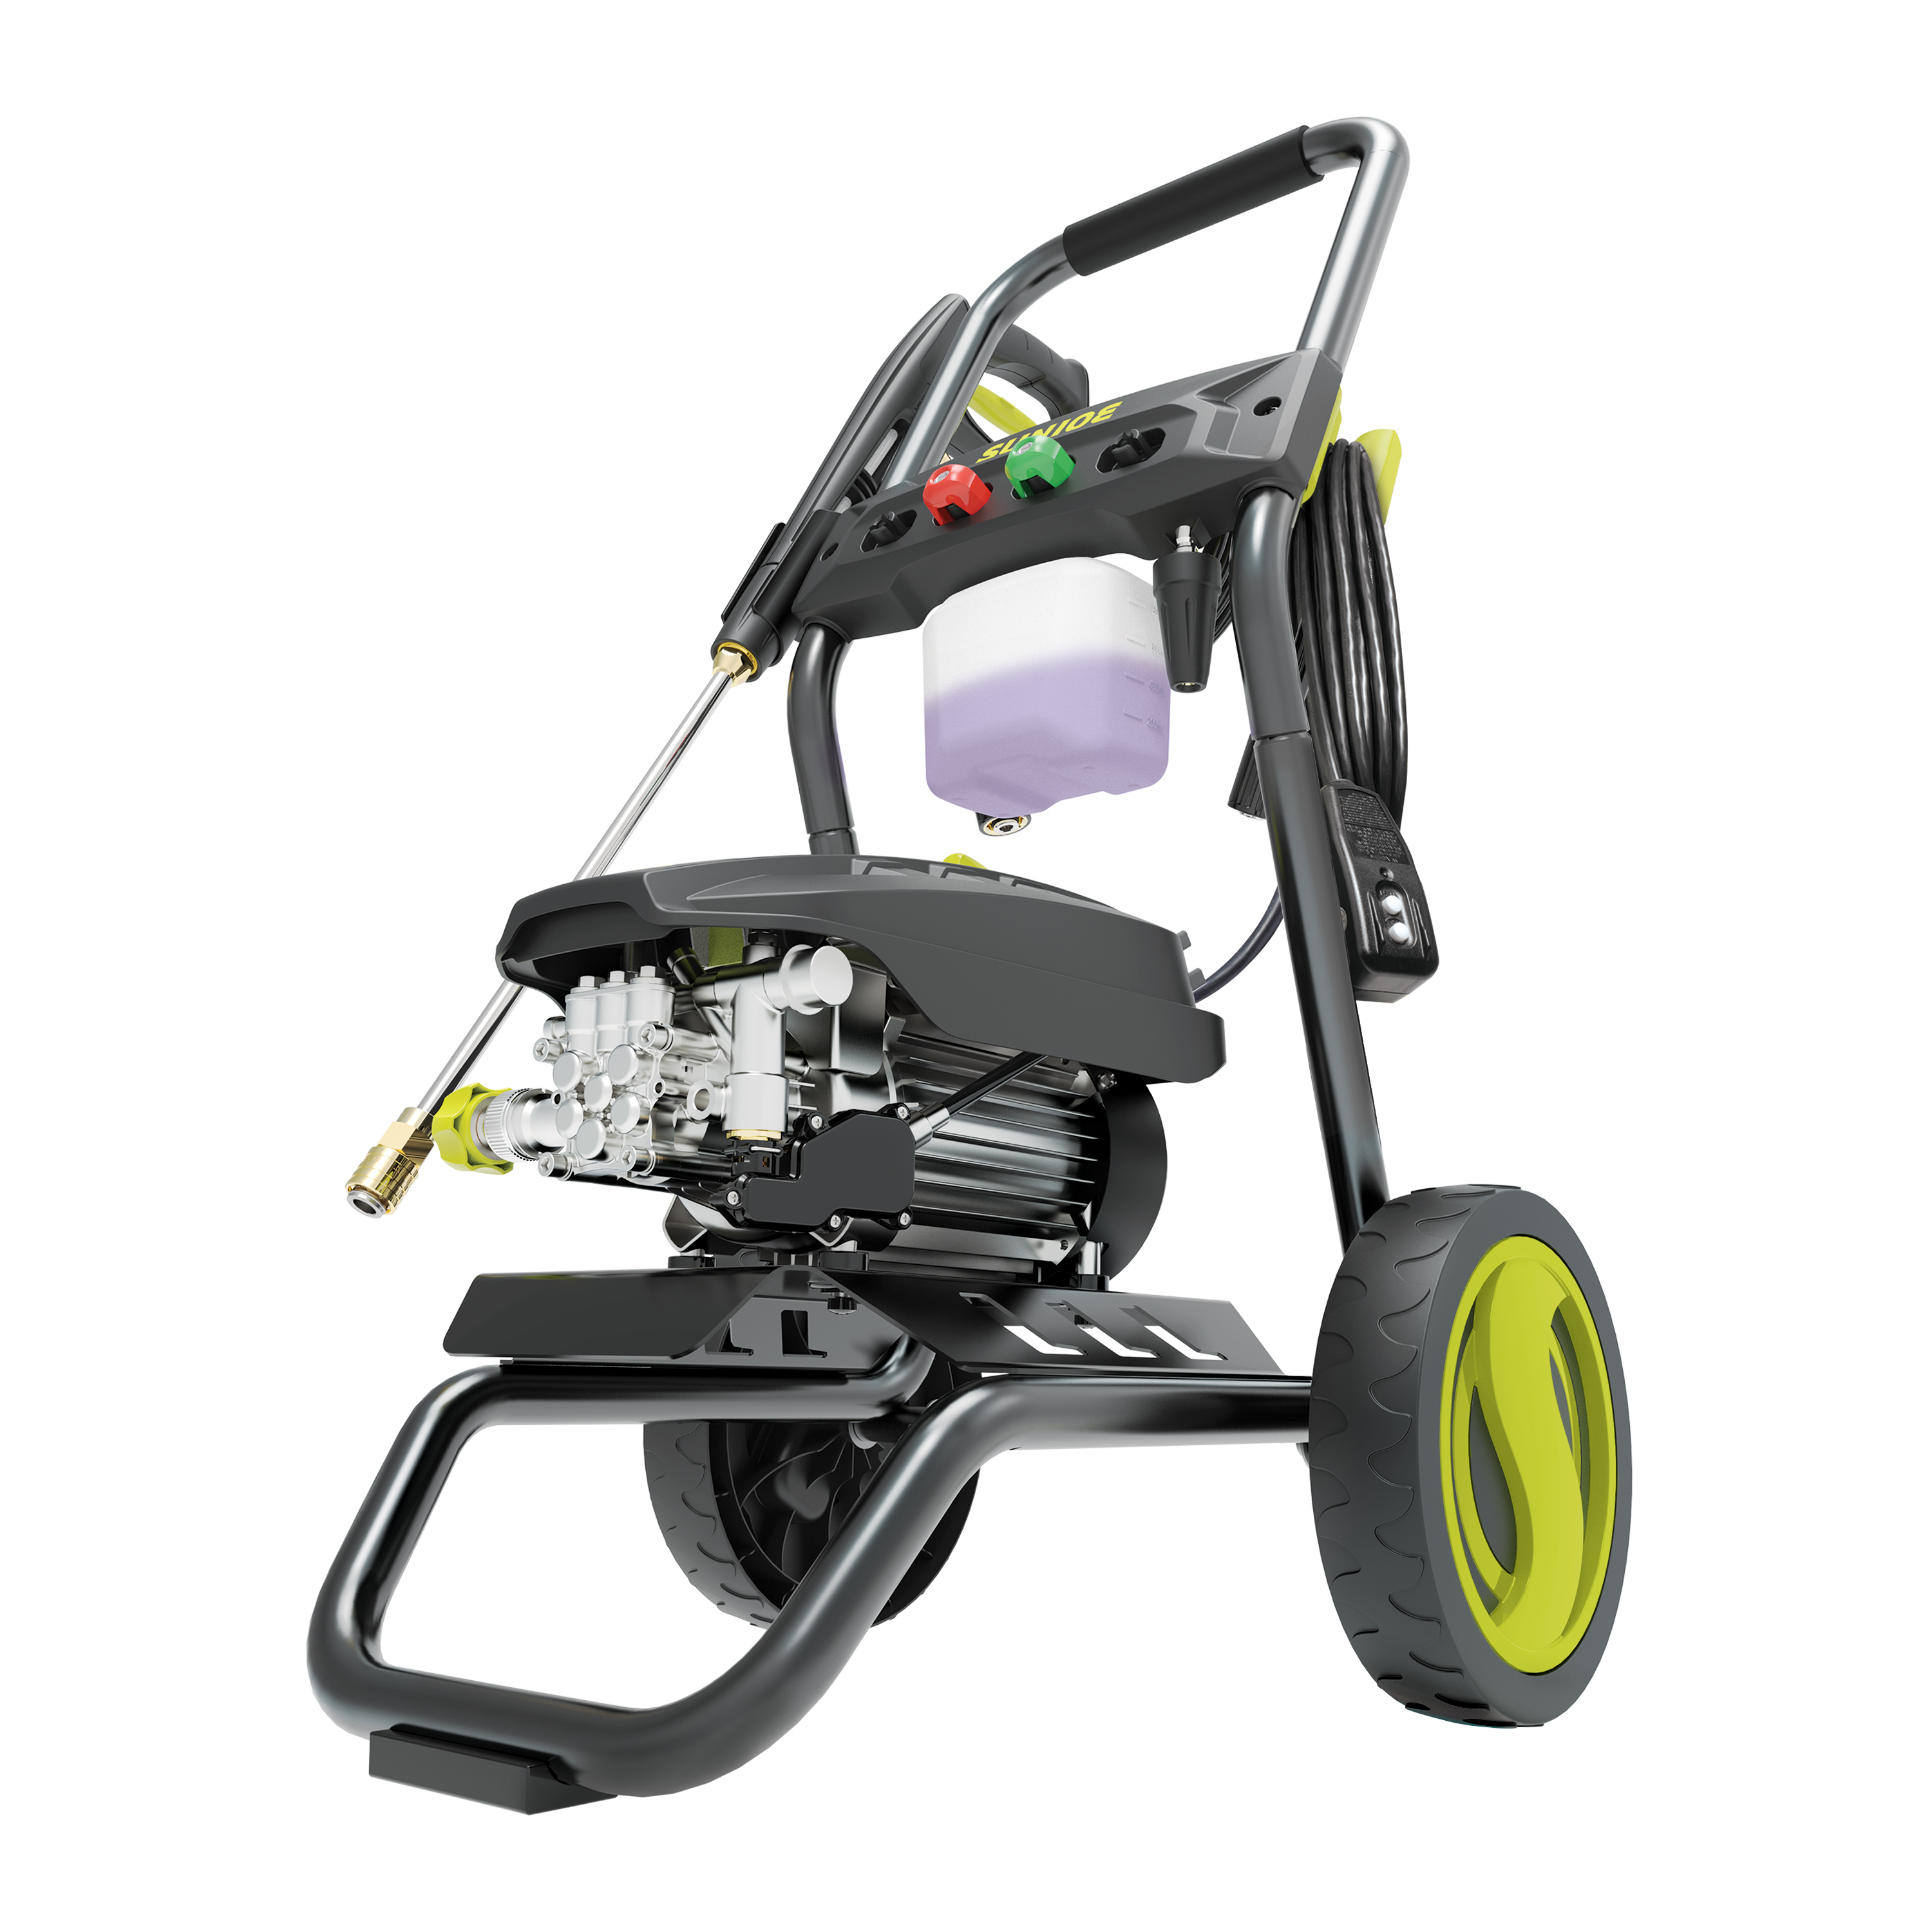 Sun Joe SPX8000-PRO High-Performance Brushless Induction Electric Pressure Washer W/ Steel Reinforced Hose, Quick Connect + Turbo Nozzles, & Metal Lance - image 3 of 10